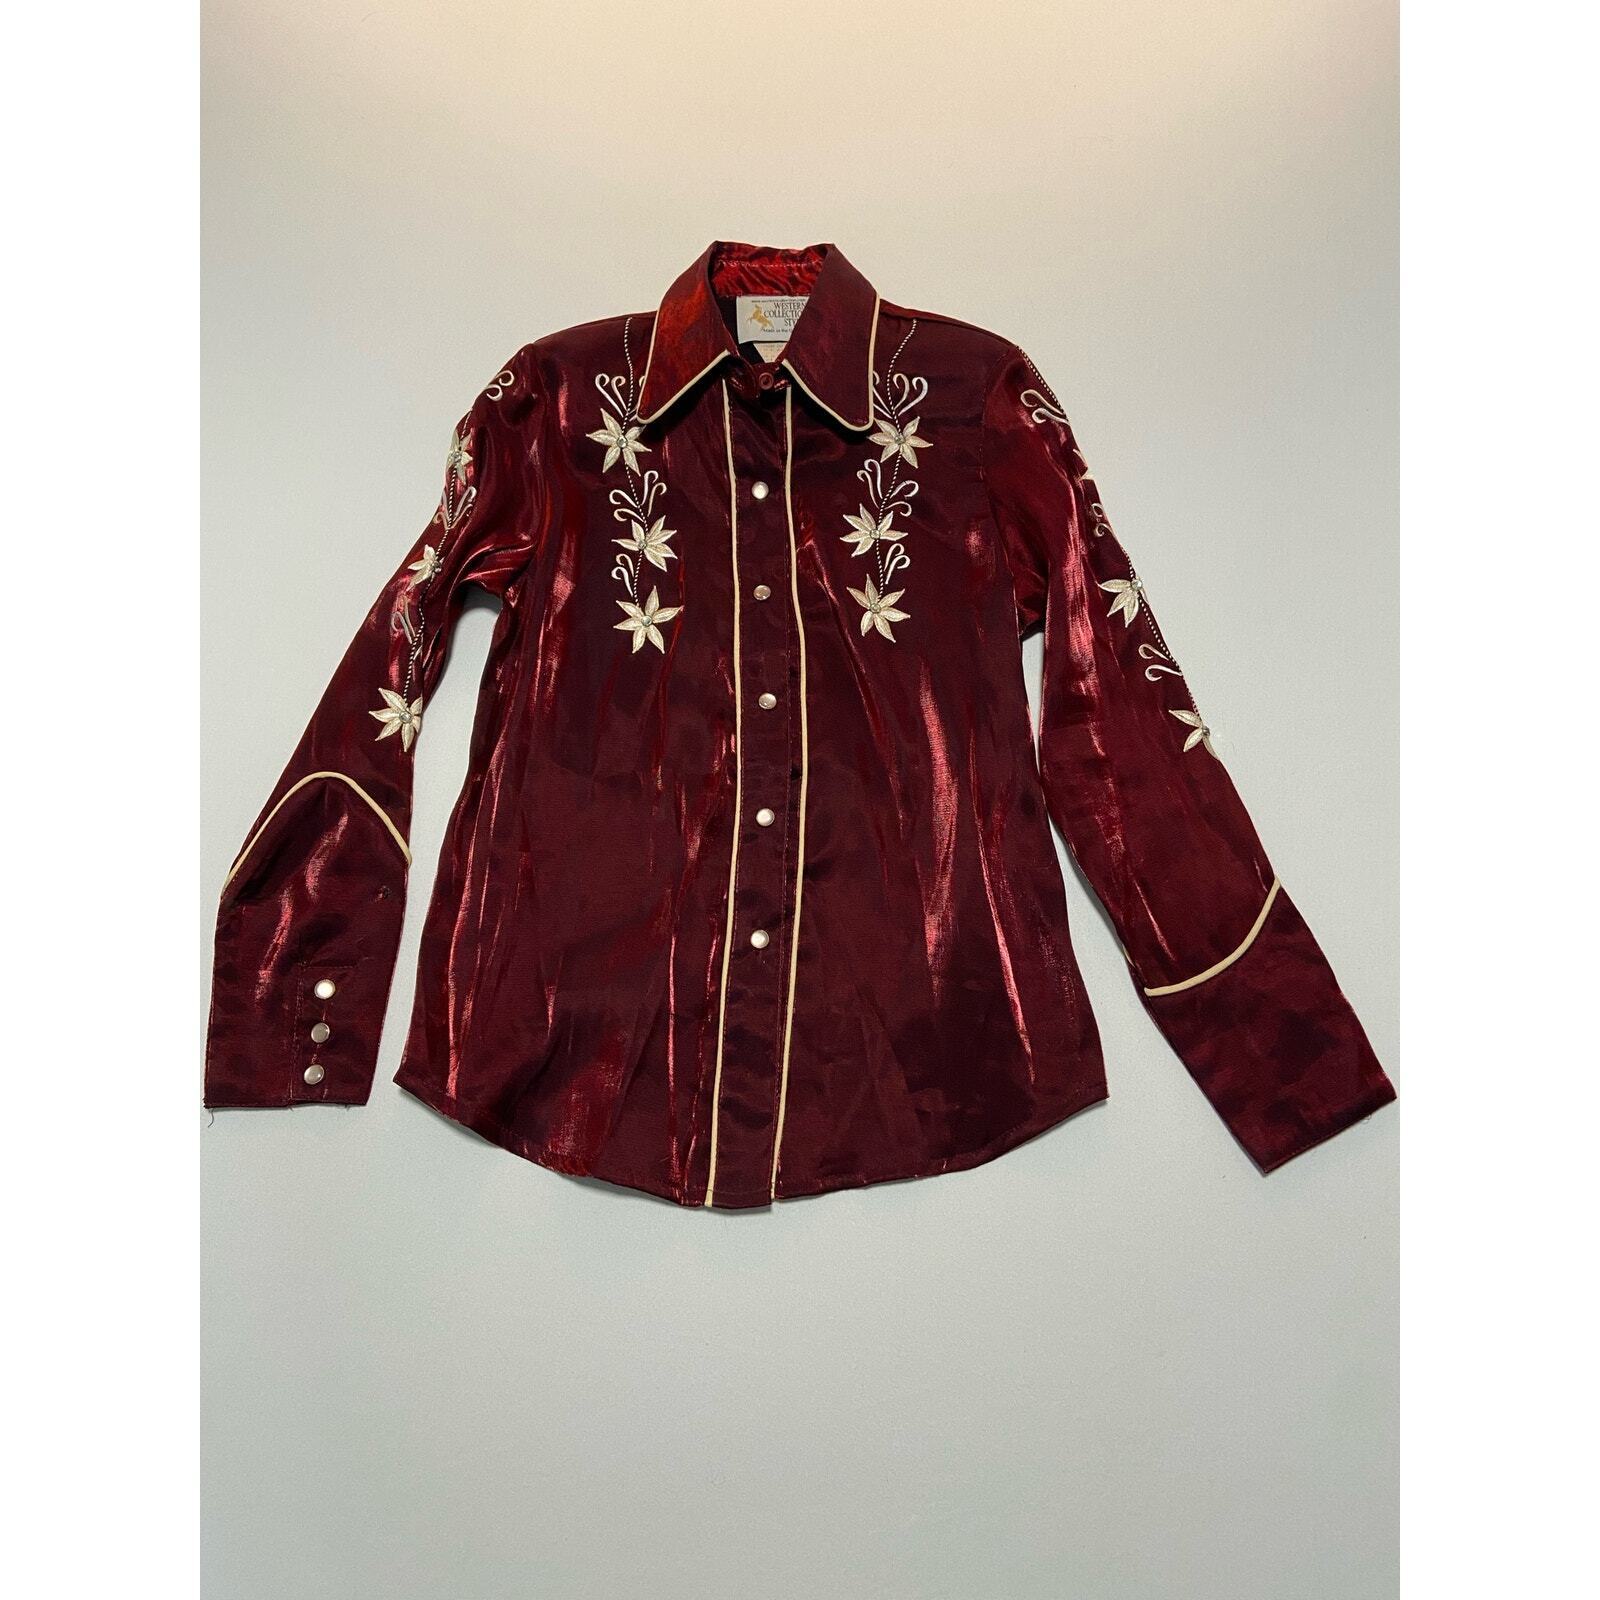 Vintage women’s embroidered western show shirt. 